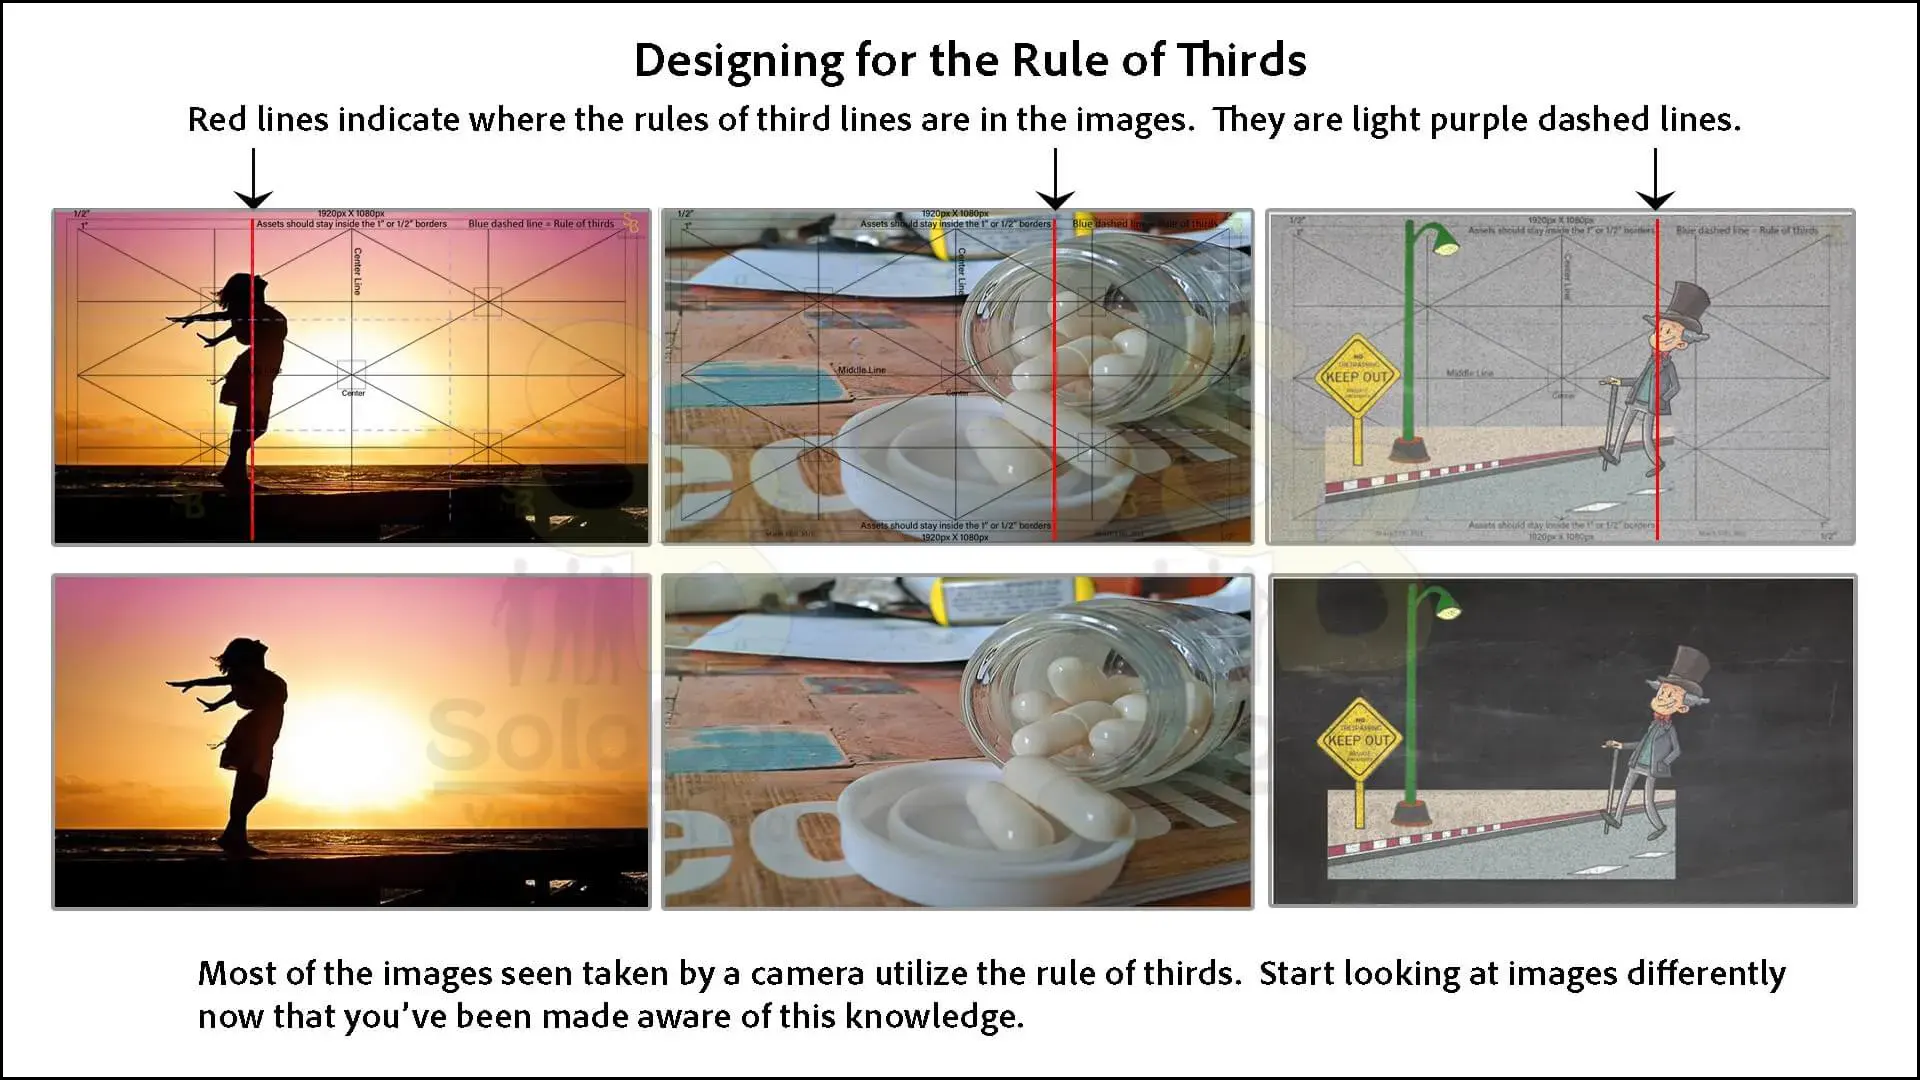 Showing images demonstrating how to design for the rule of thirds in Doodly videos.